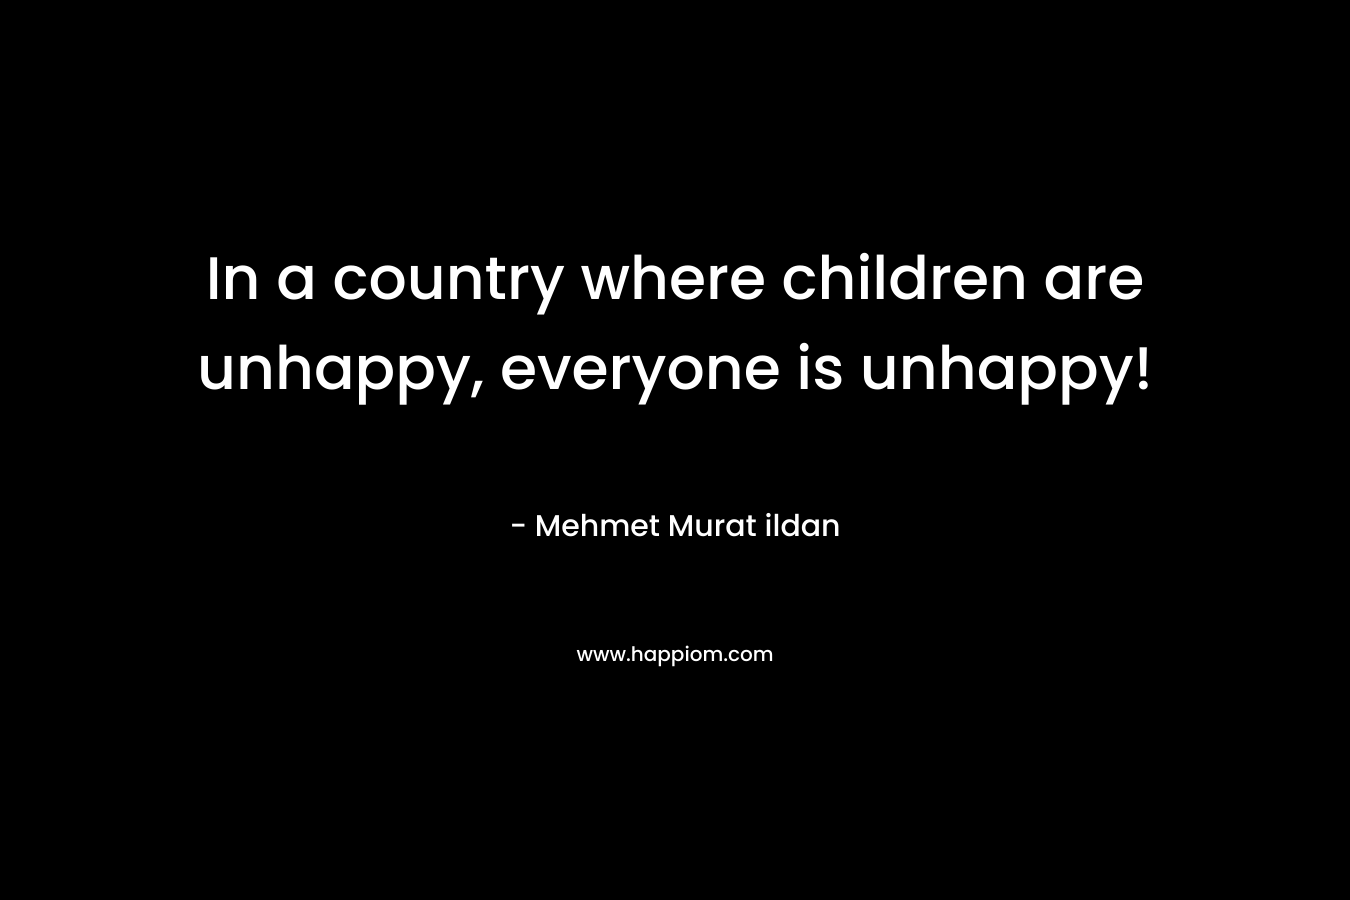 In a country where children are unhappy, everyone is unhappy!